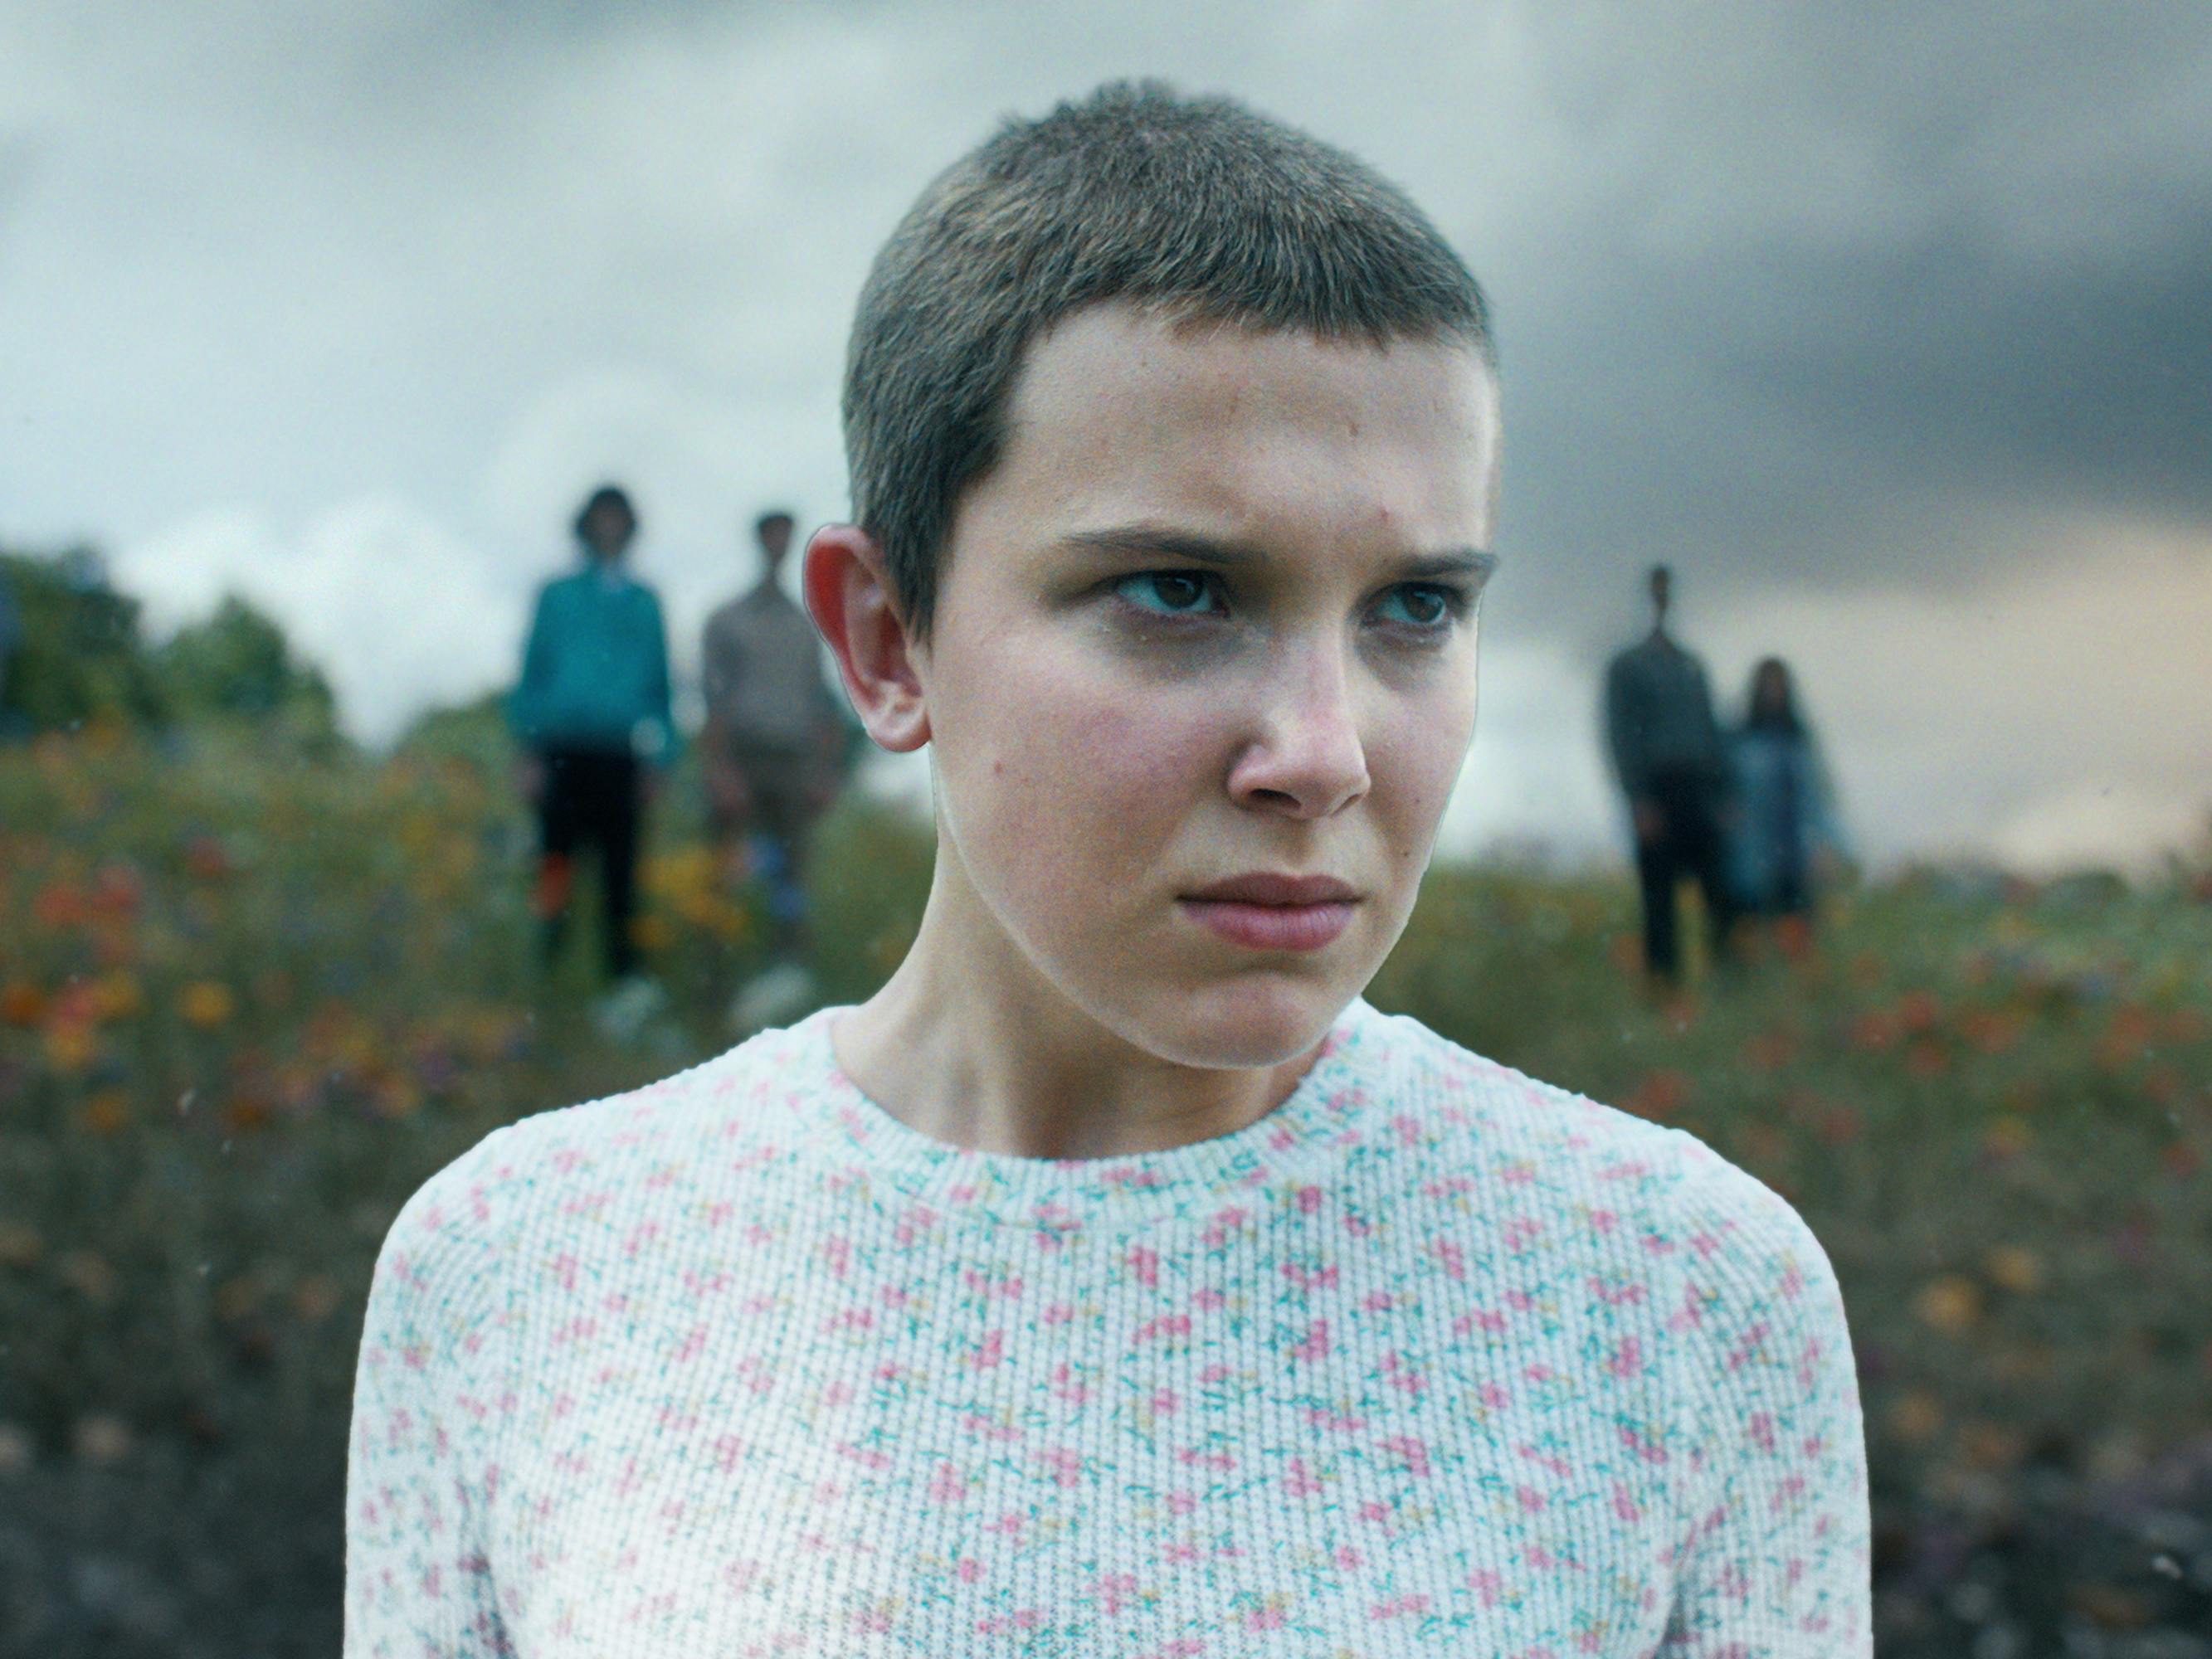 Eleven (Millie Bobby Brown) wears a patterned shirt and stands against a gray sky.